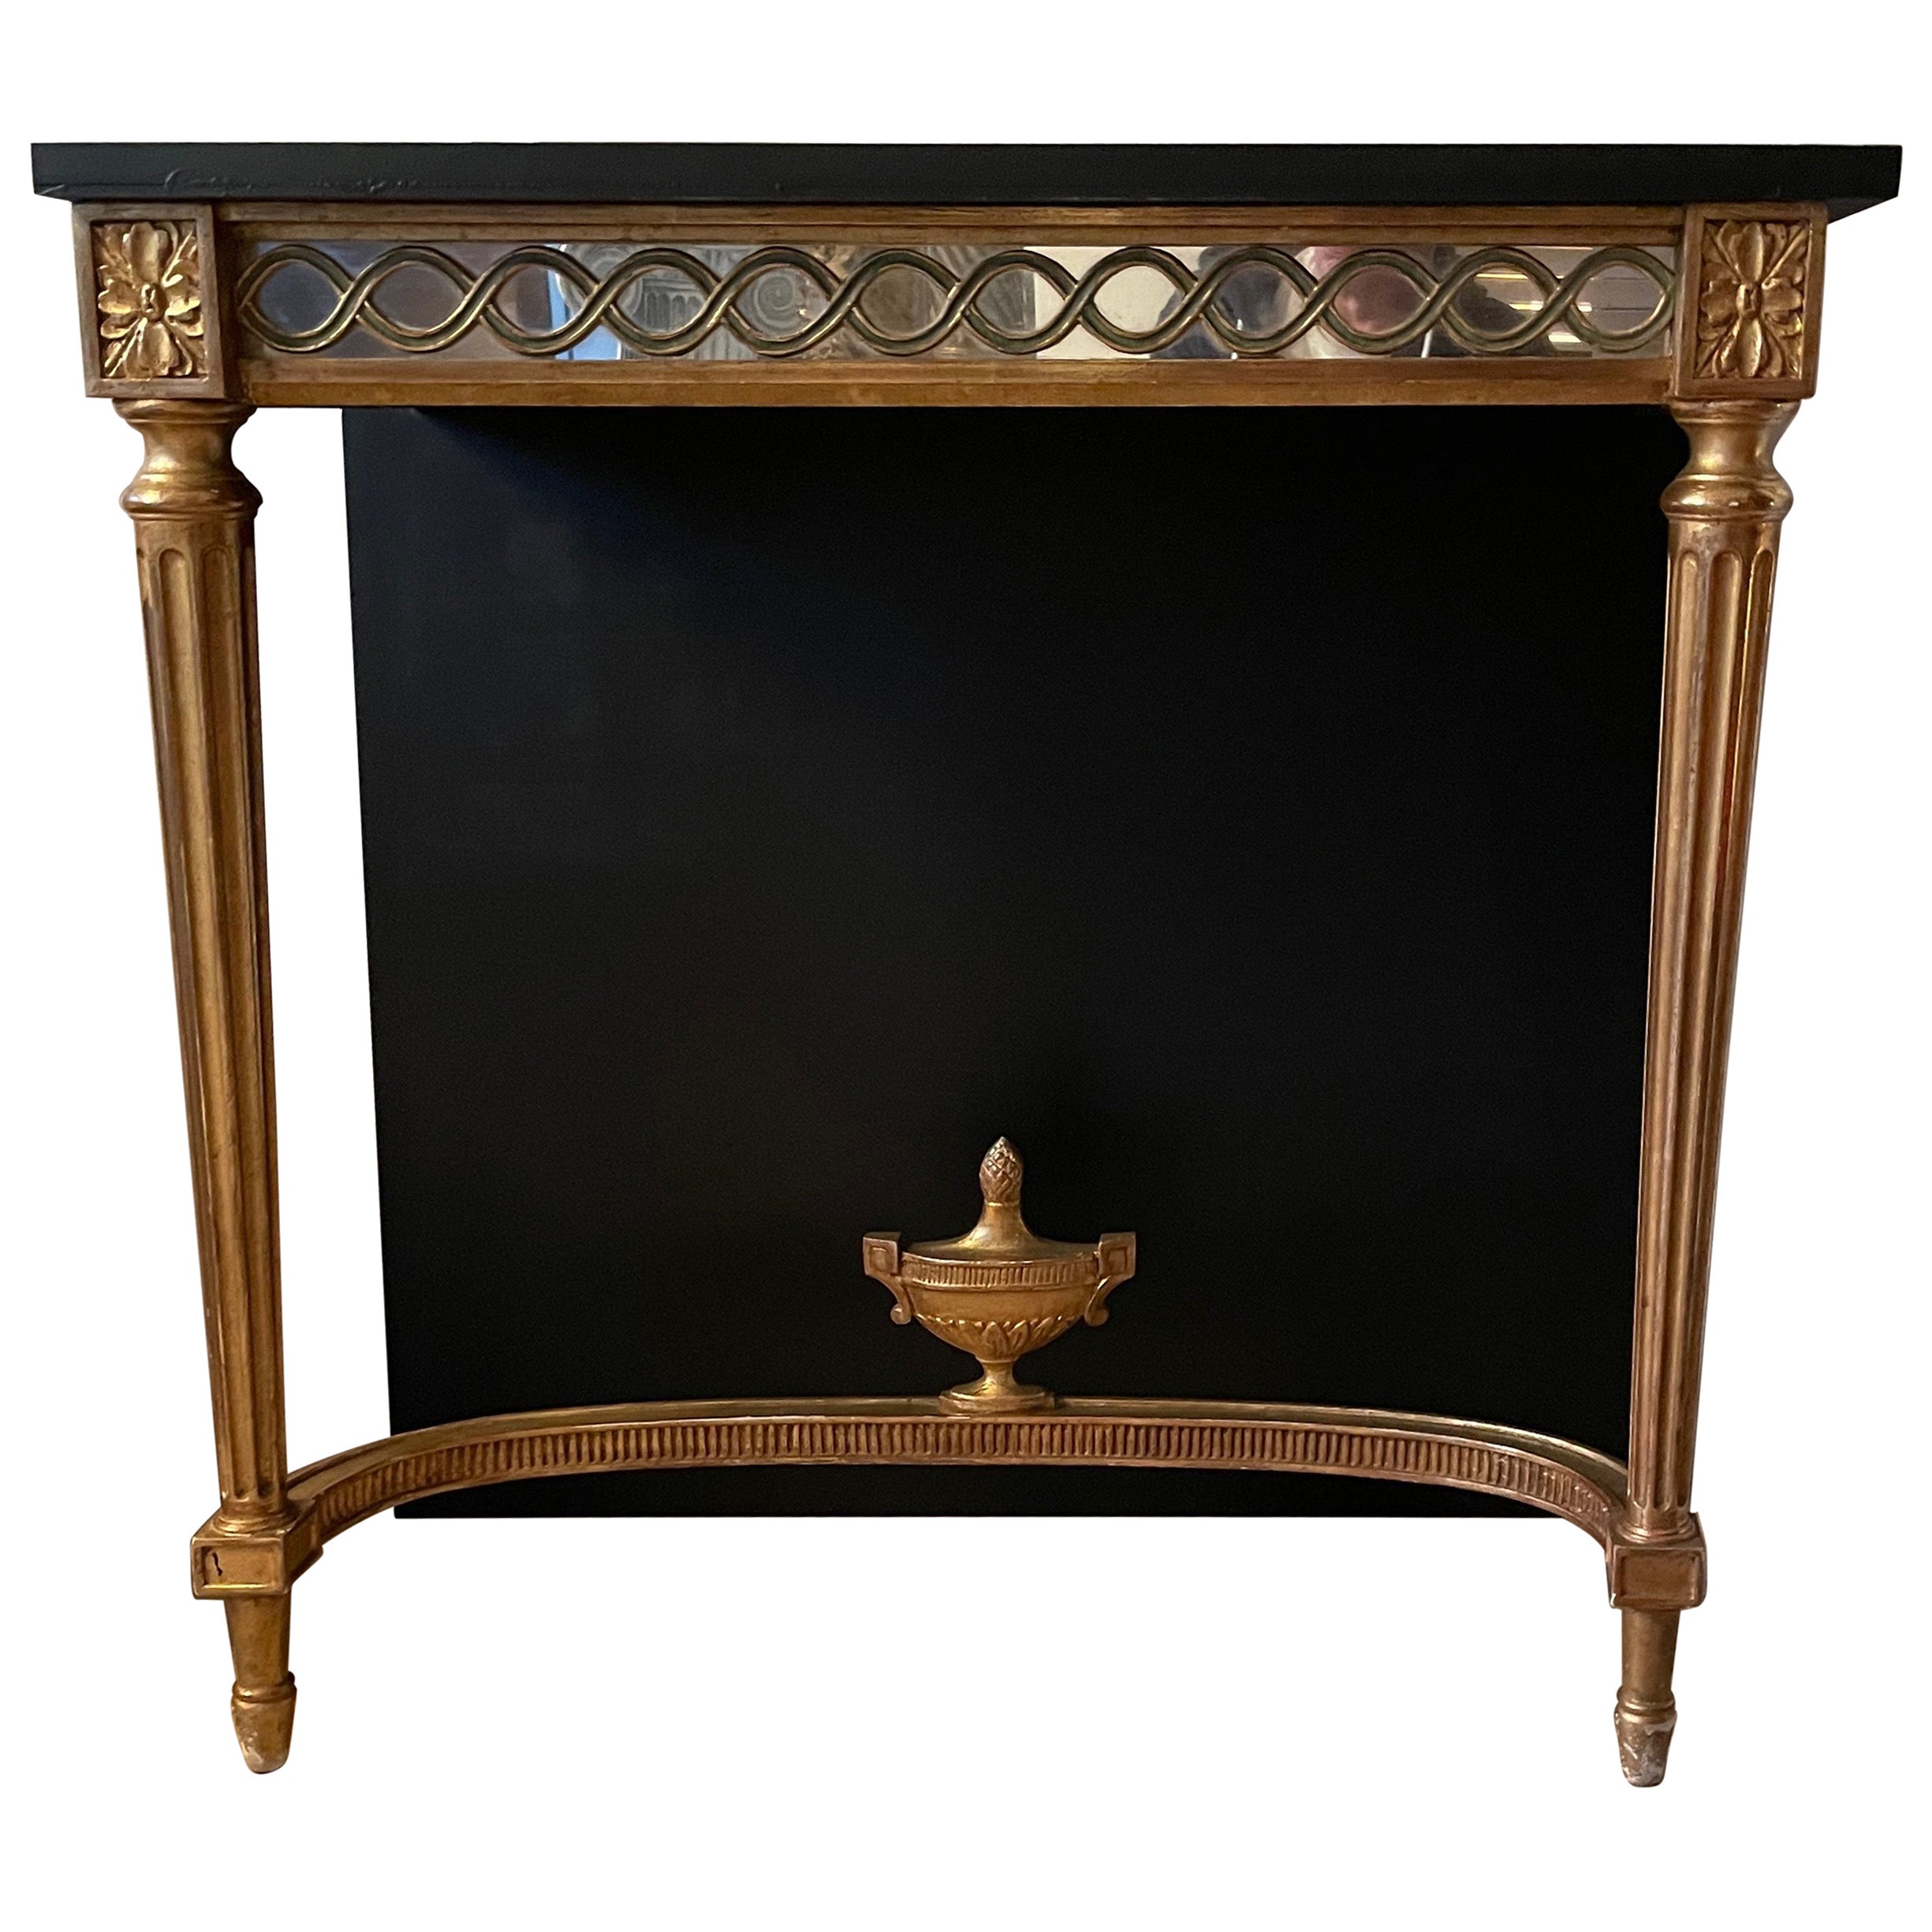 Neoclassical Gilt Wood Console Table with Mirror and Wood Top, Paris 1950